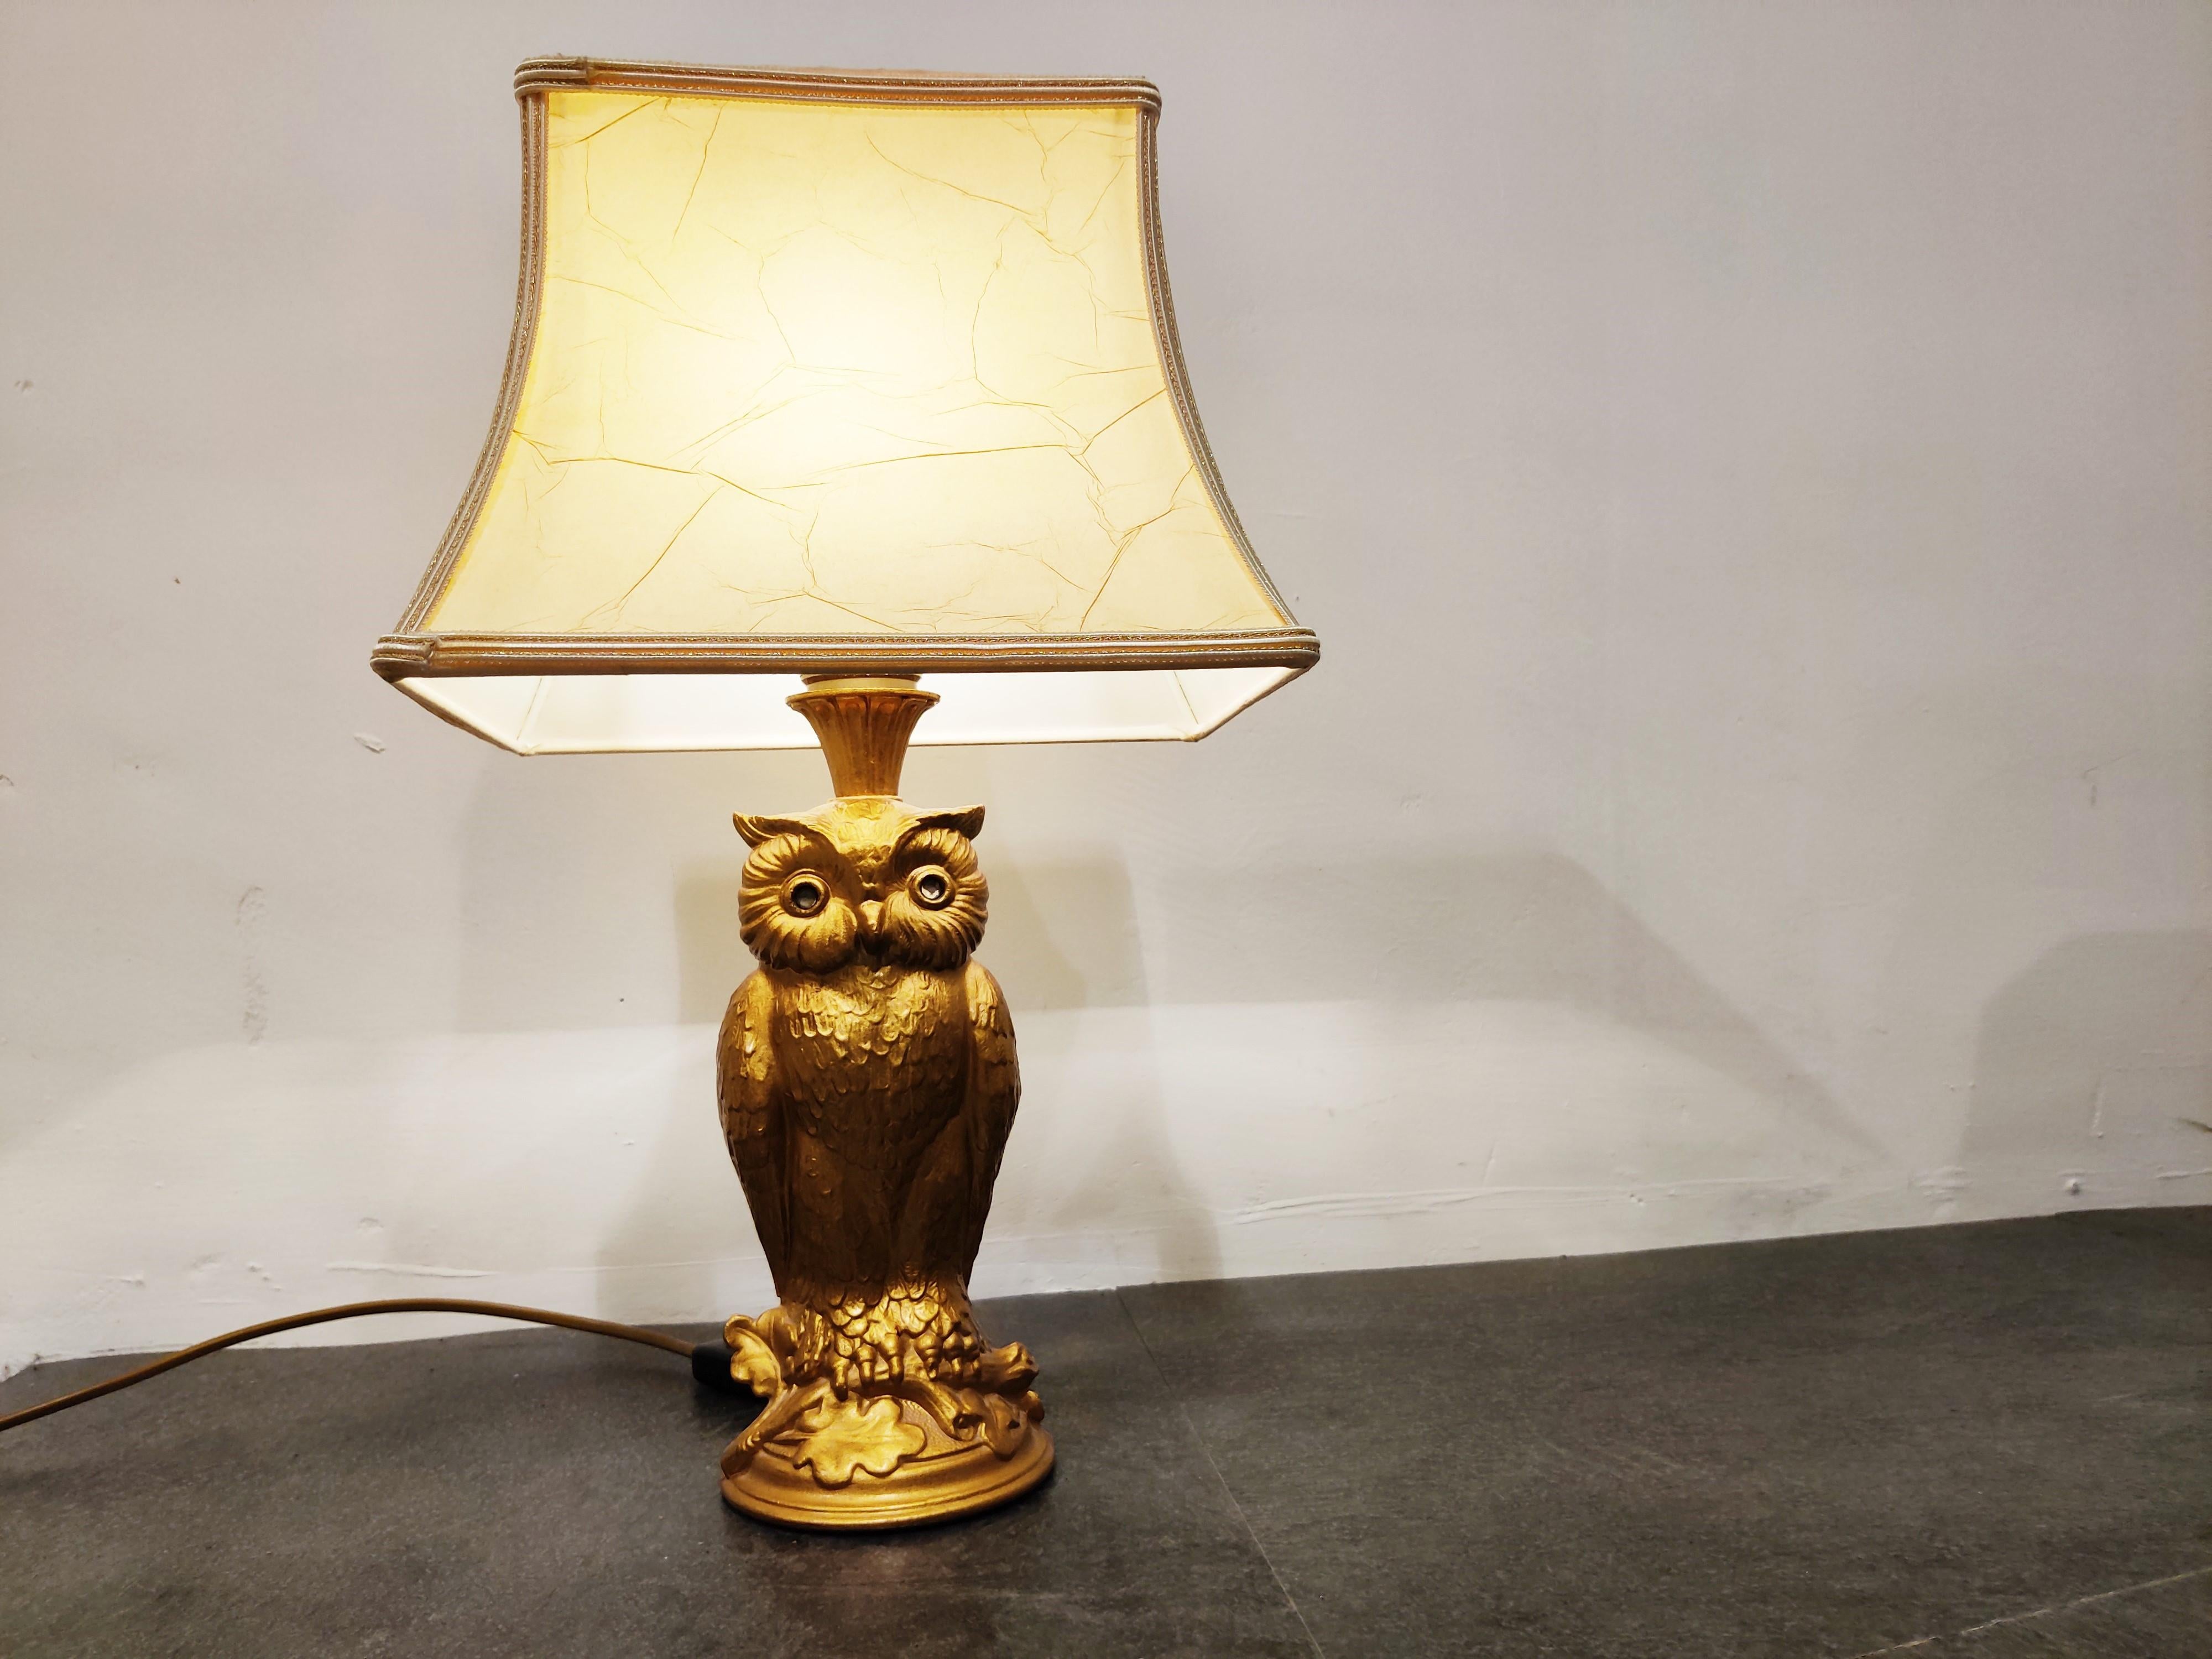 Charming sculptural brass owl lamp made by Loevsky & Loevsky and sold by Deknudt lighting company.

Works with a regular E27 light bulb.

Comes with a vintage lamp shade.

Loevsky & Loevsky produced these table lamps from the 1960s until the